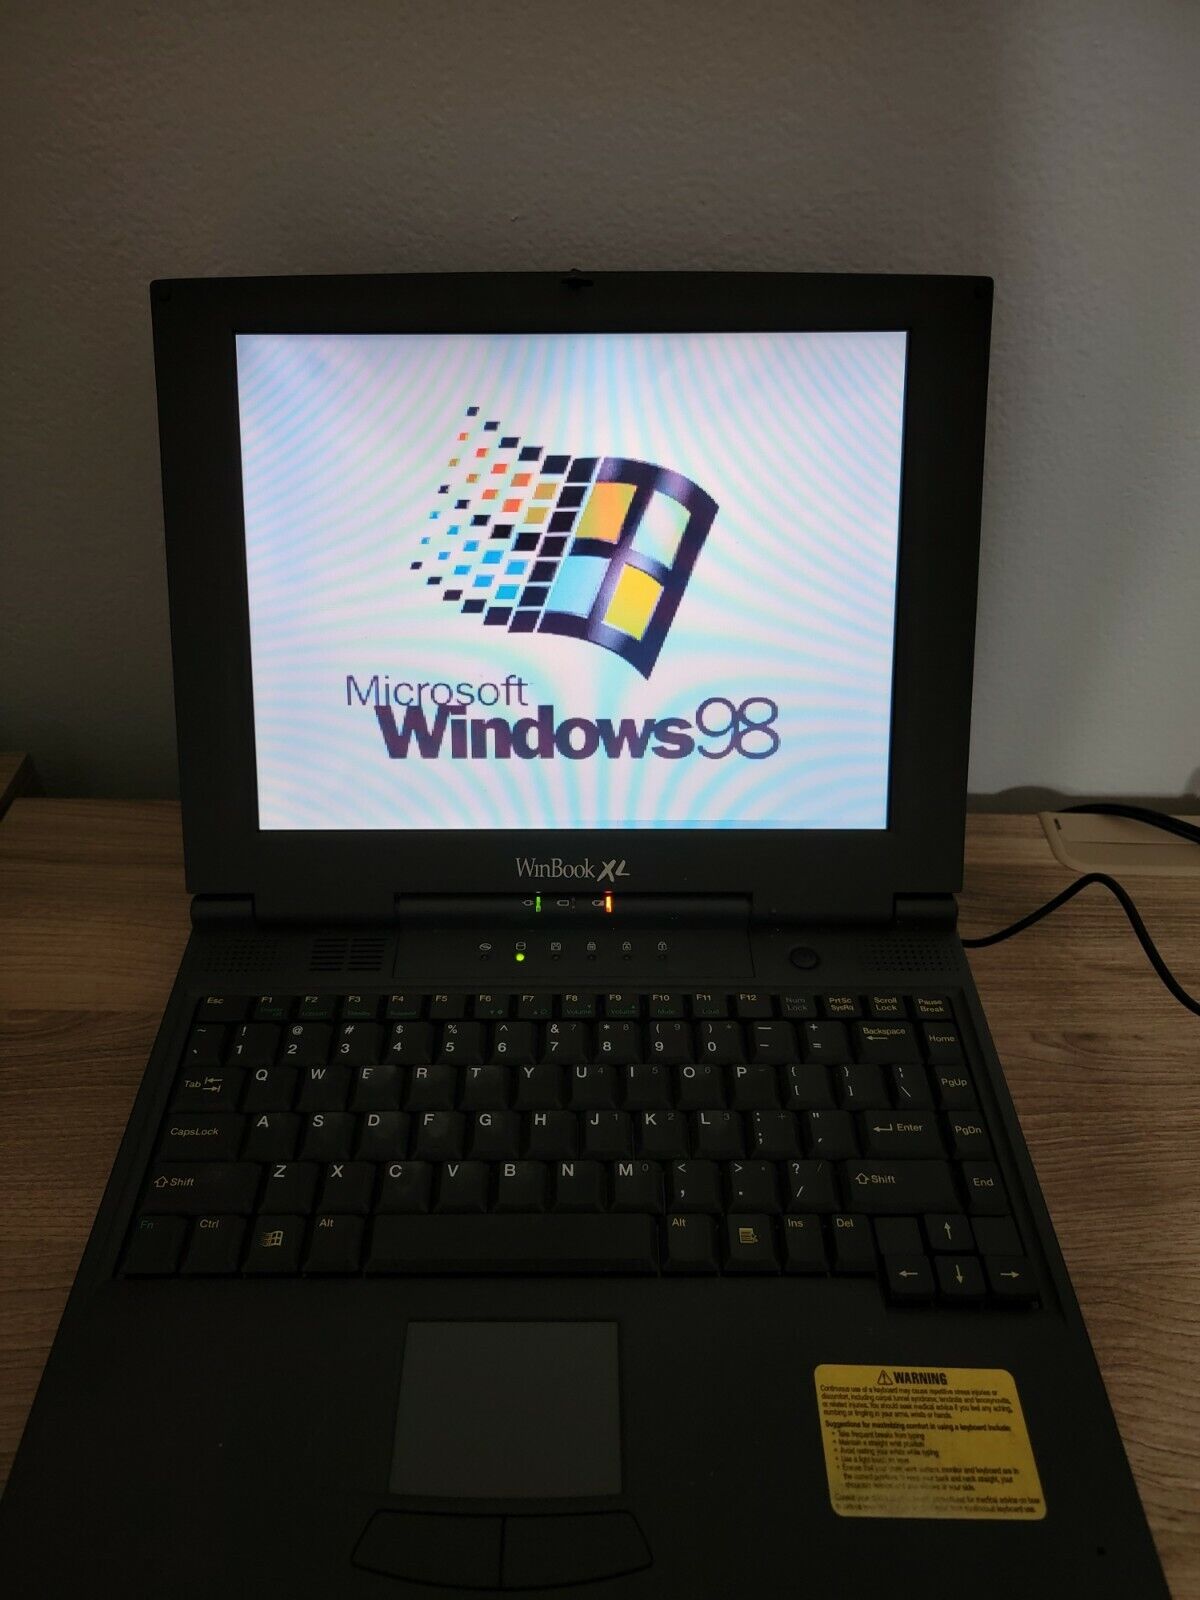 Vintage Winbook XL laptop w/dock and accessories